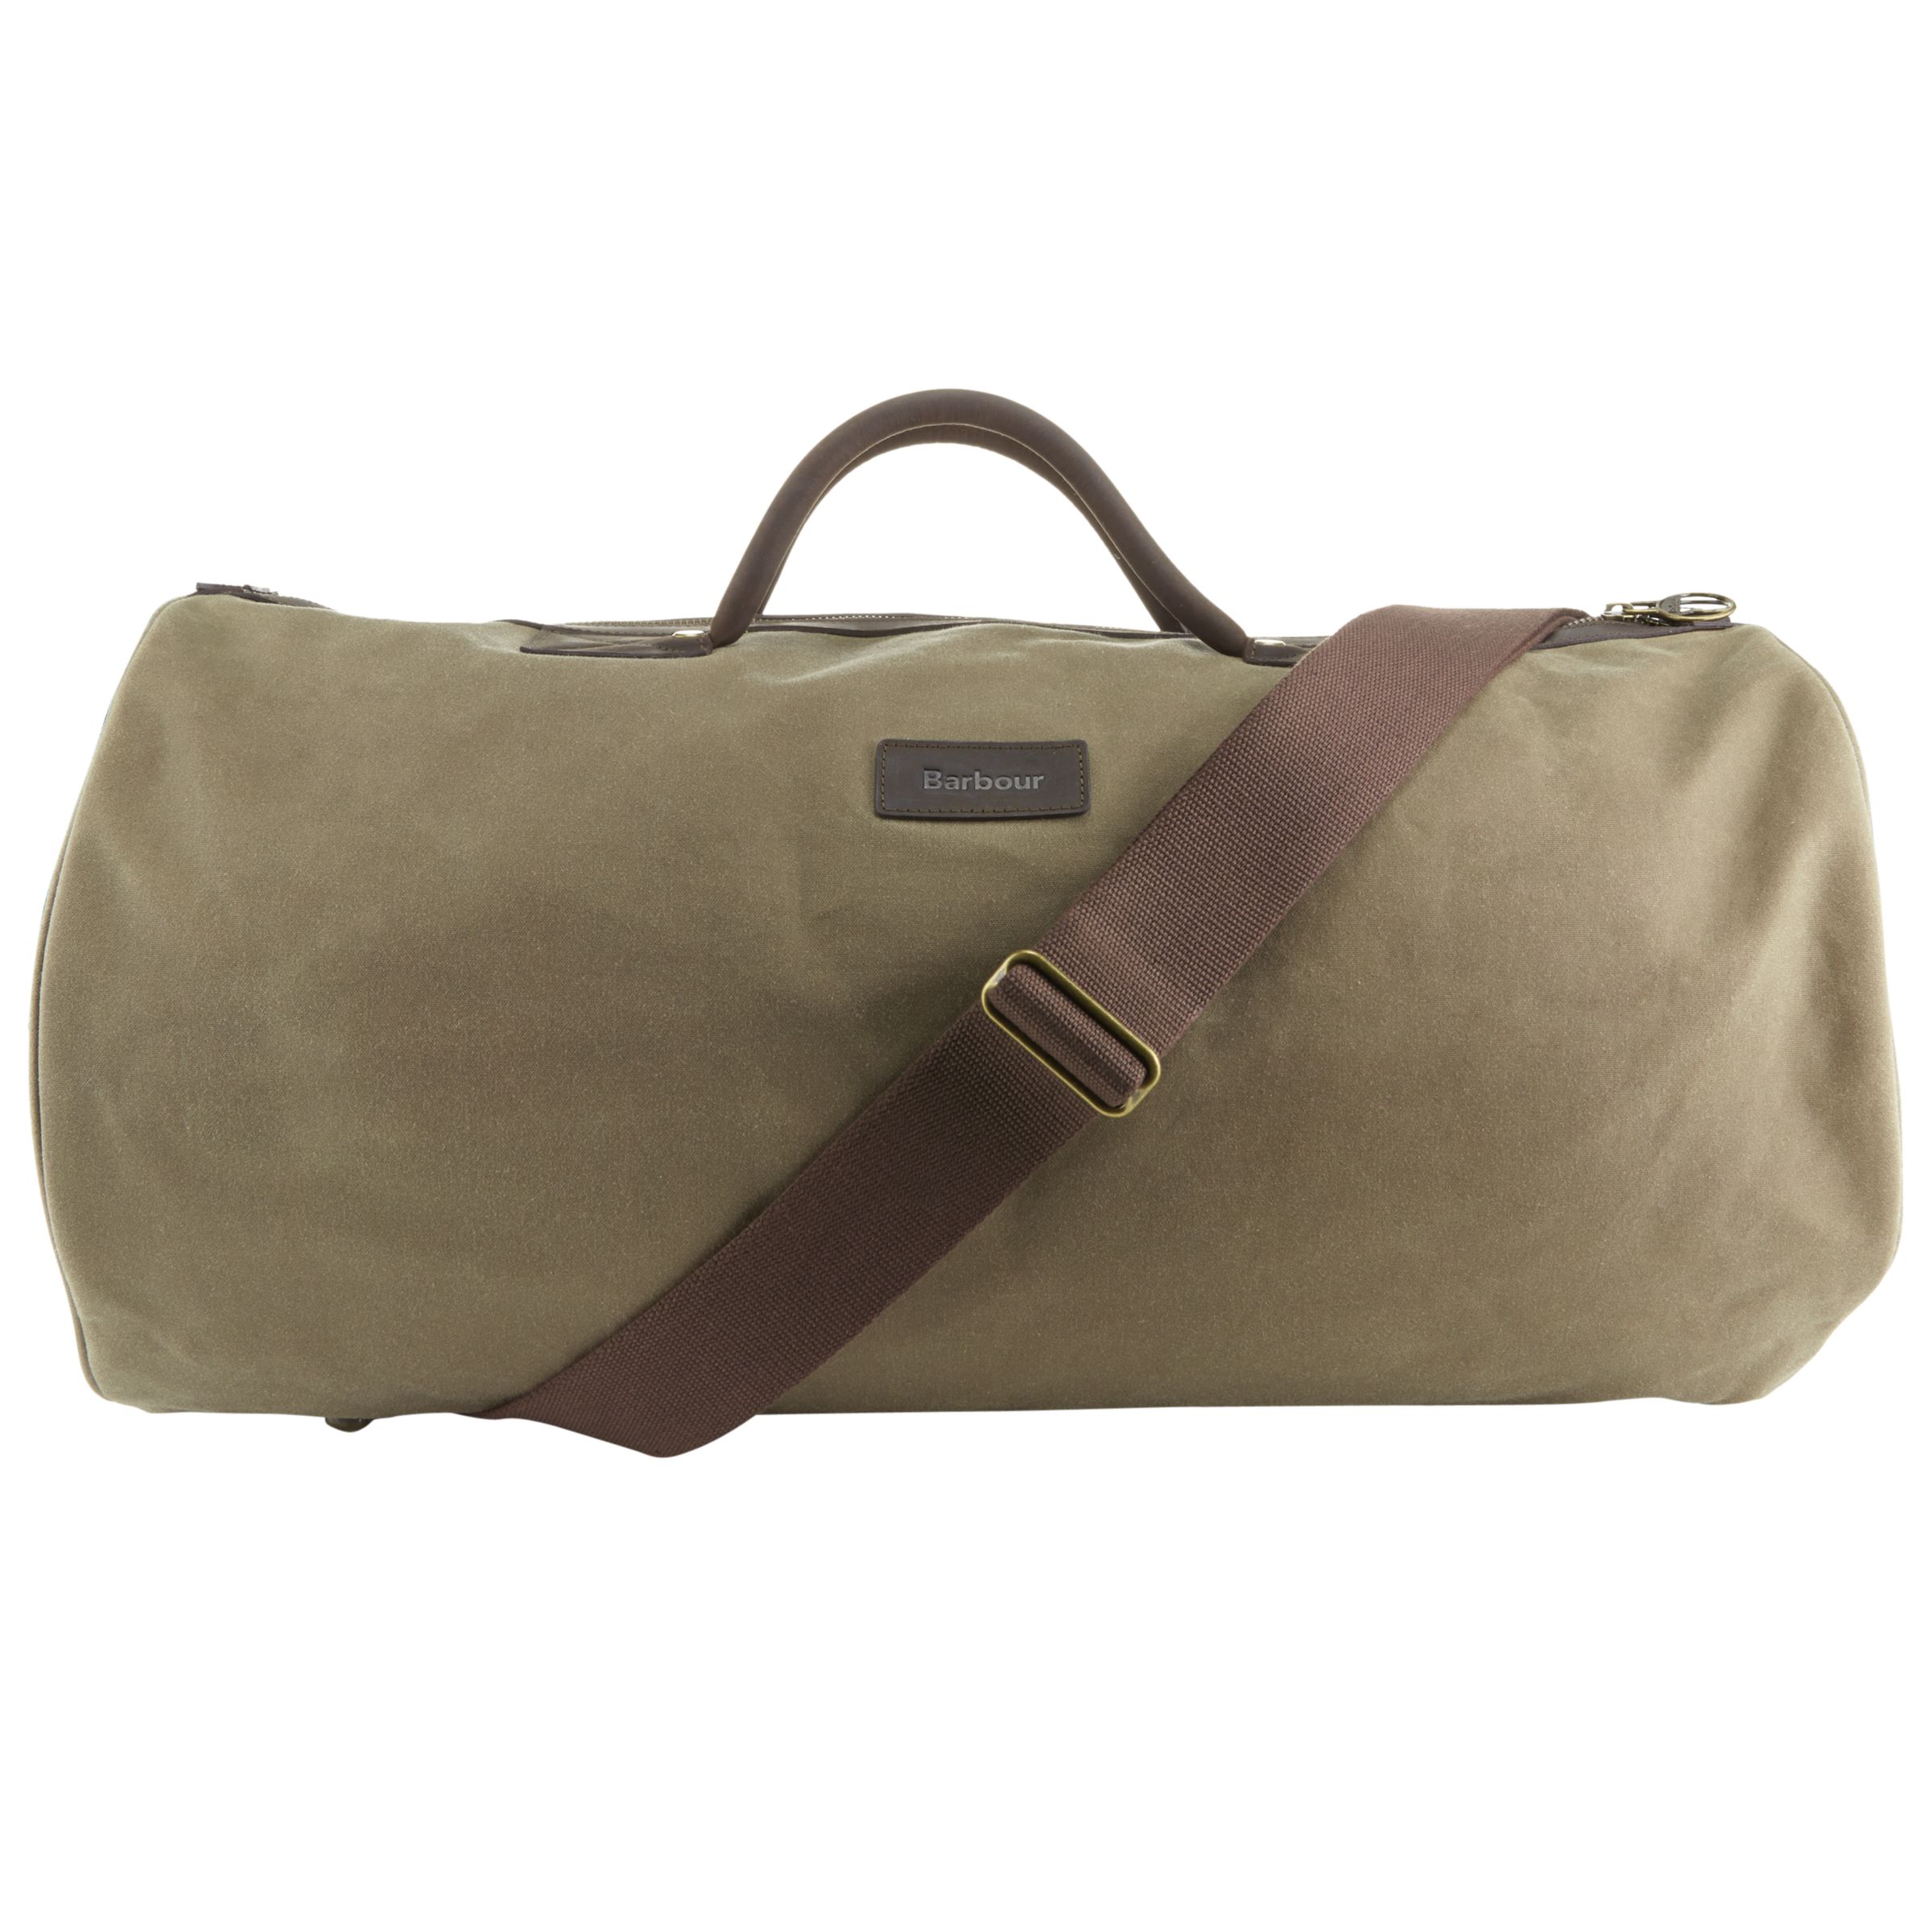 Barbour Waxed Cotton Holdall, Sandstone 